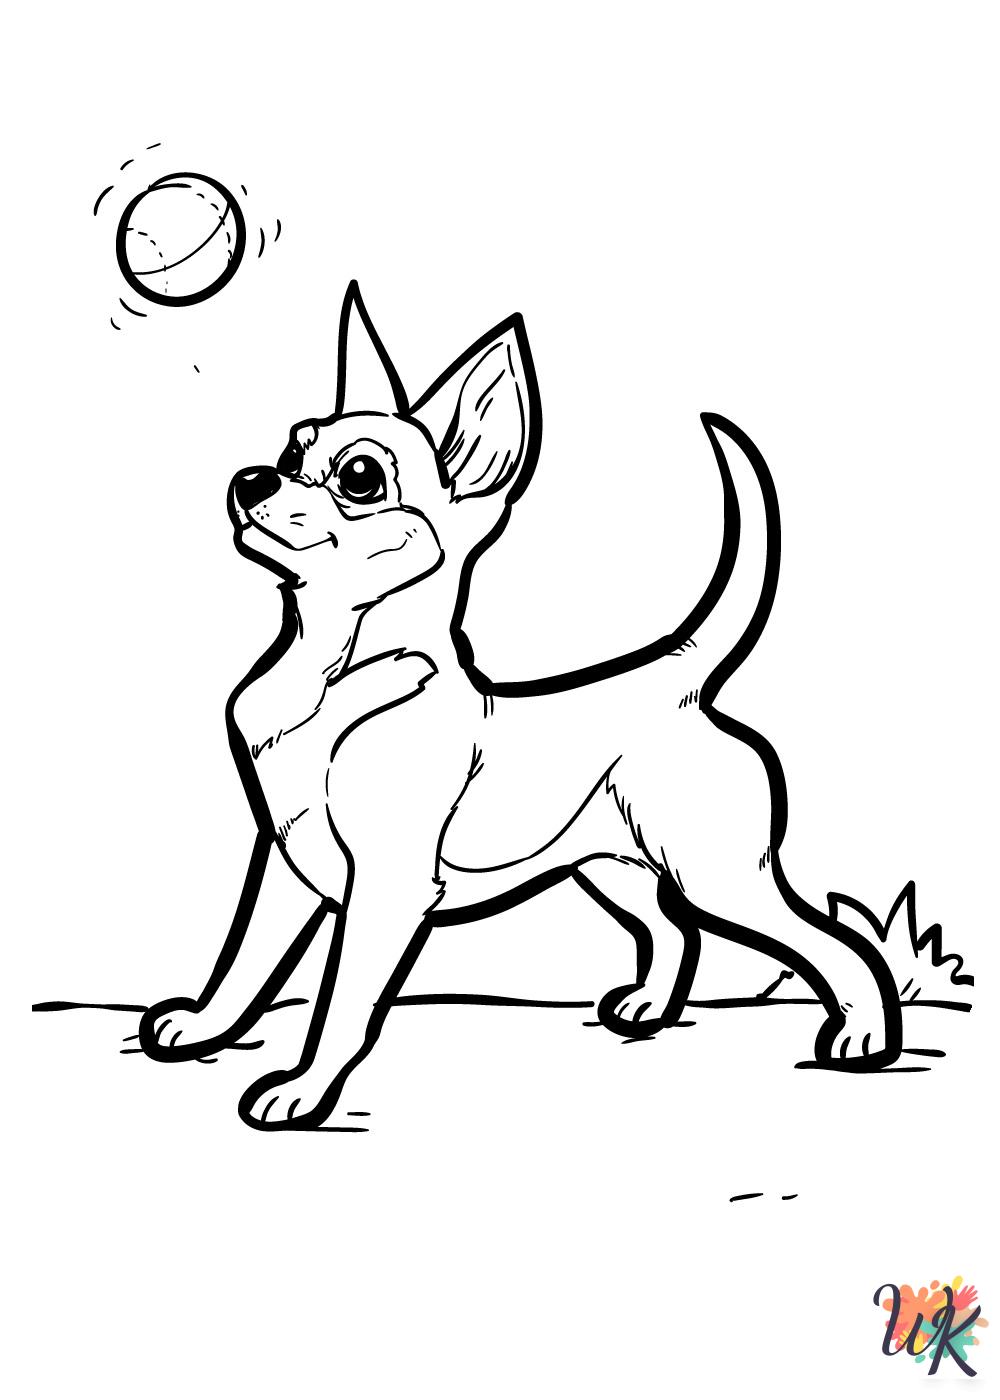 Dogs themed coloring pages